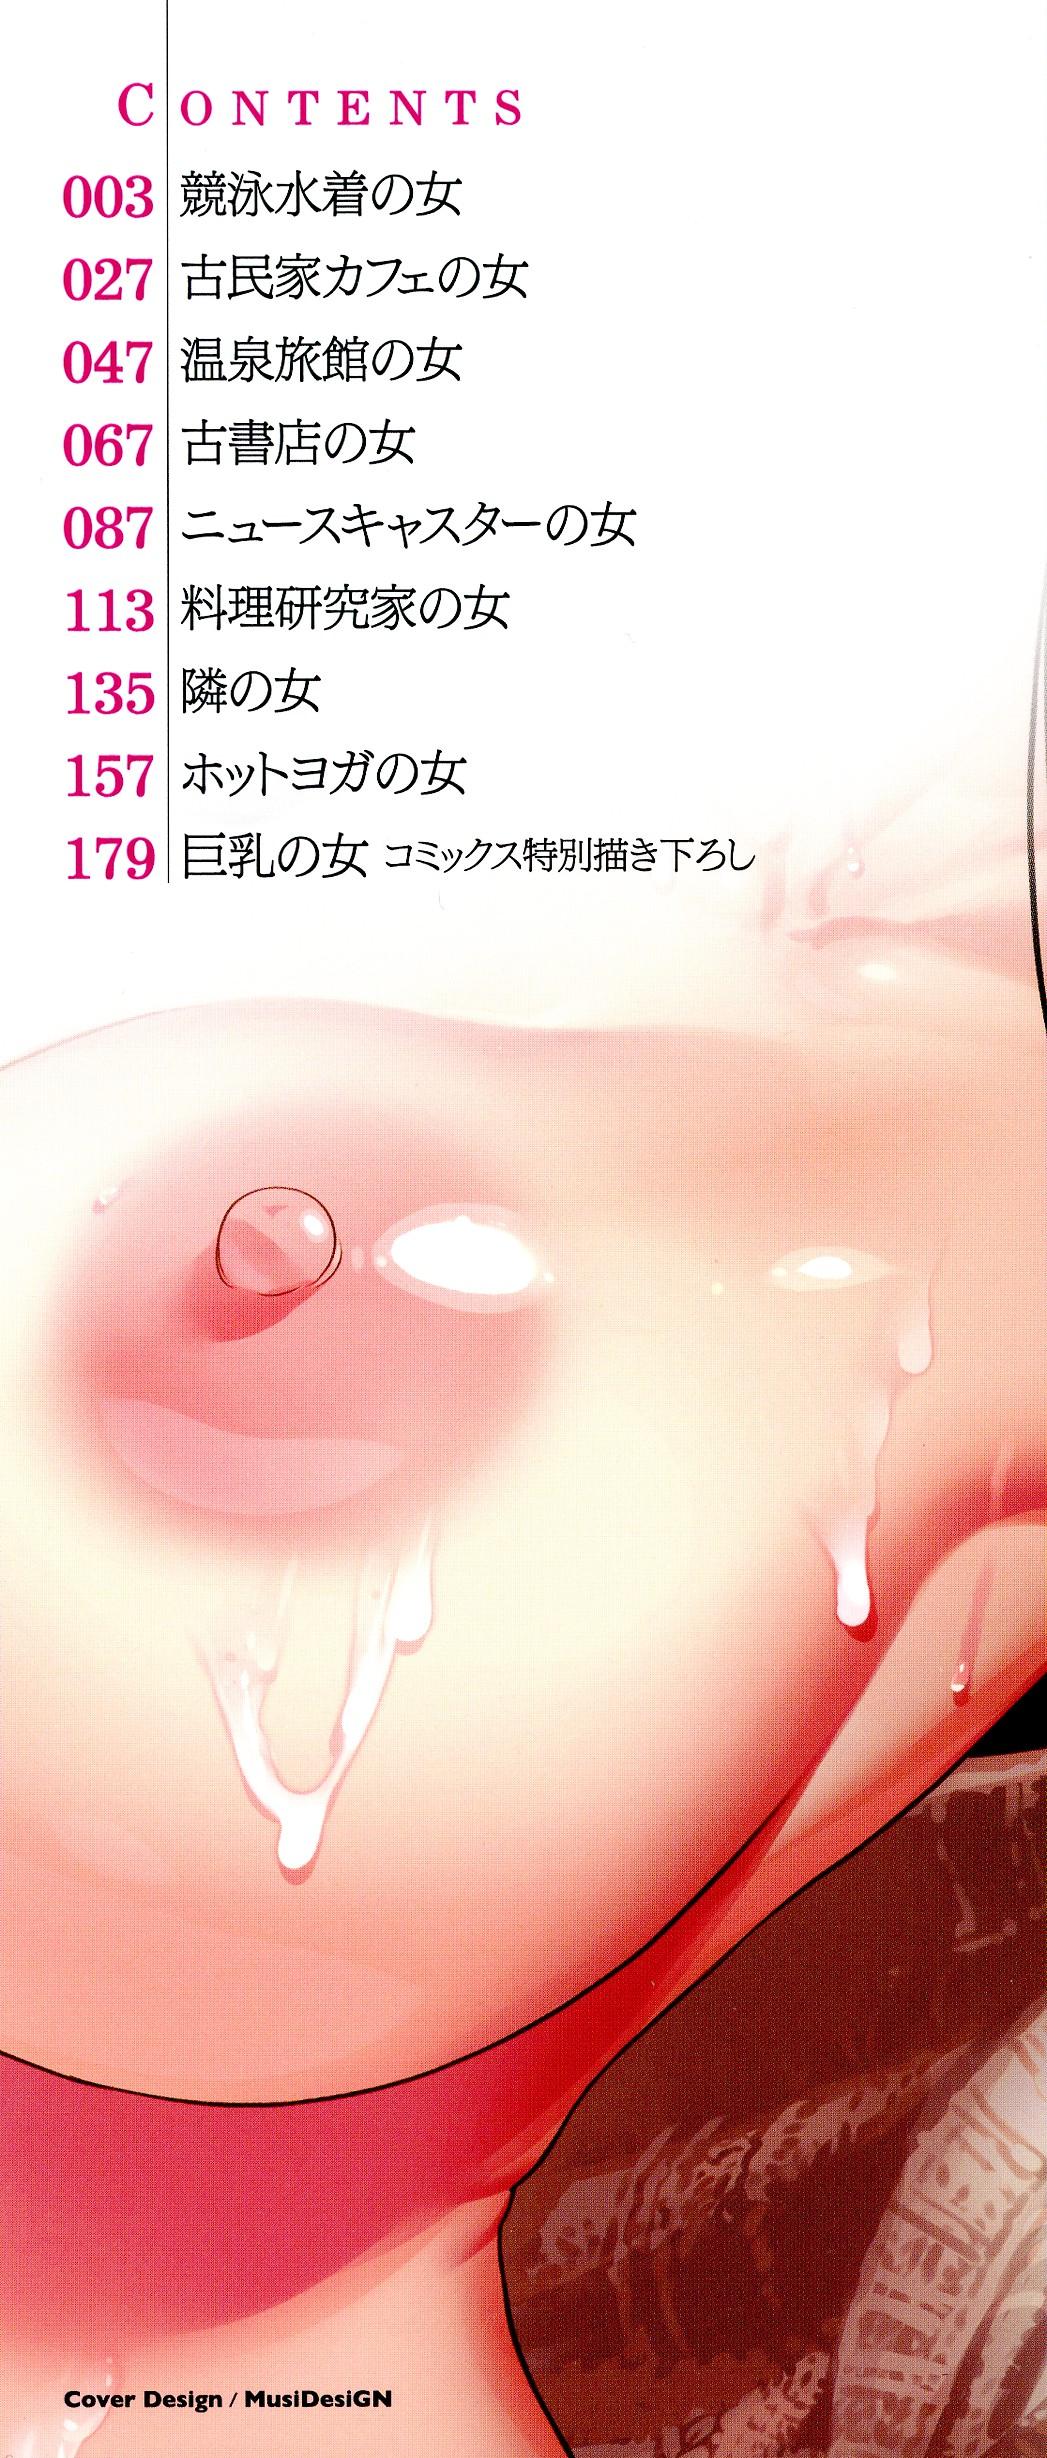 Teasing Anata ga Itte mo Owaranai - When you ejaculate, it doesn't end Pink Pussy - Page 3